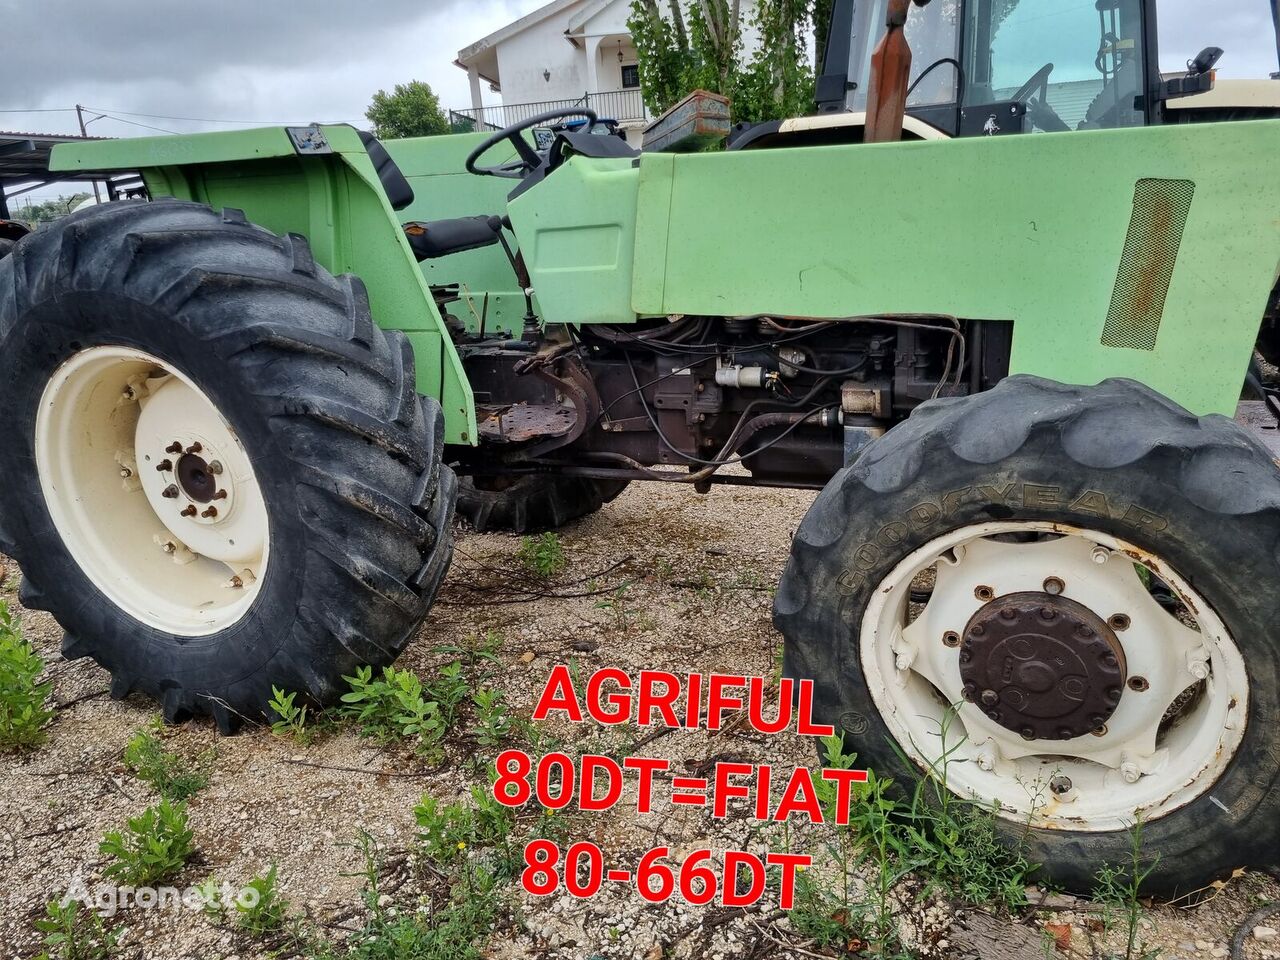 FIAT Agriful 80=FIAT 80-66DT pata peças.  wheel tractor for parts